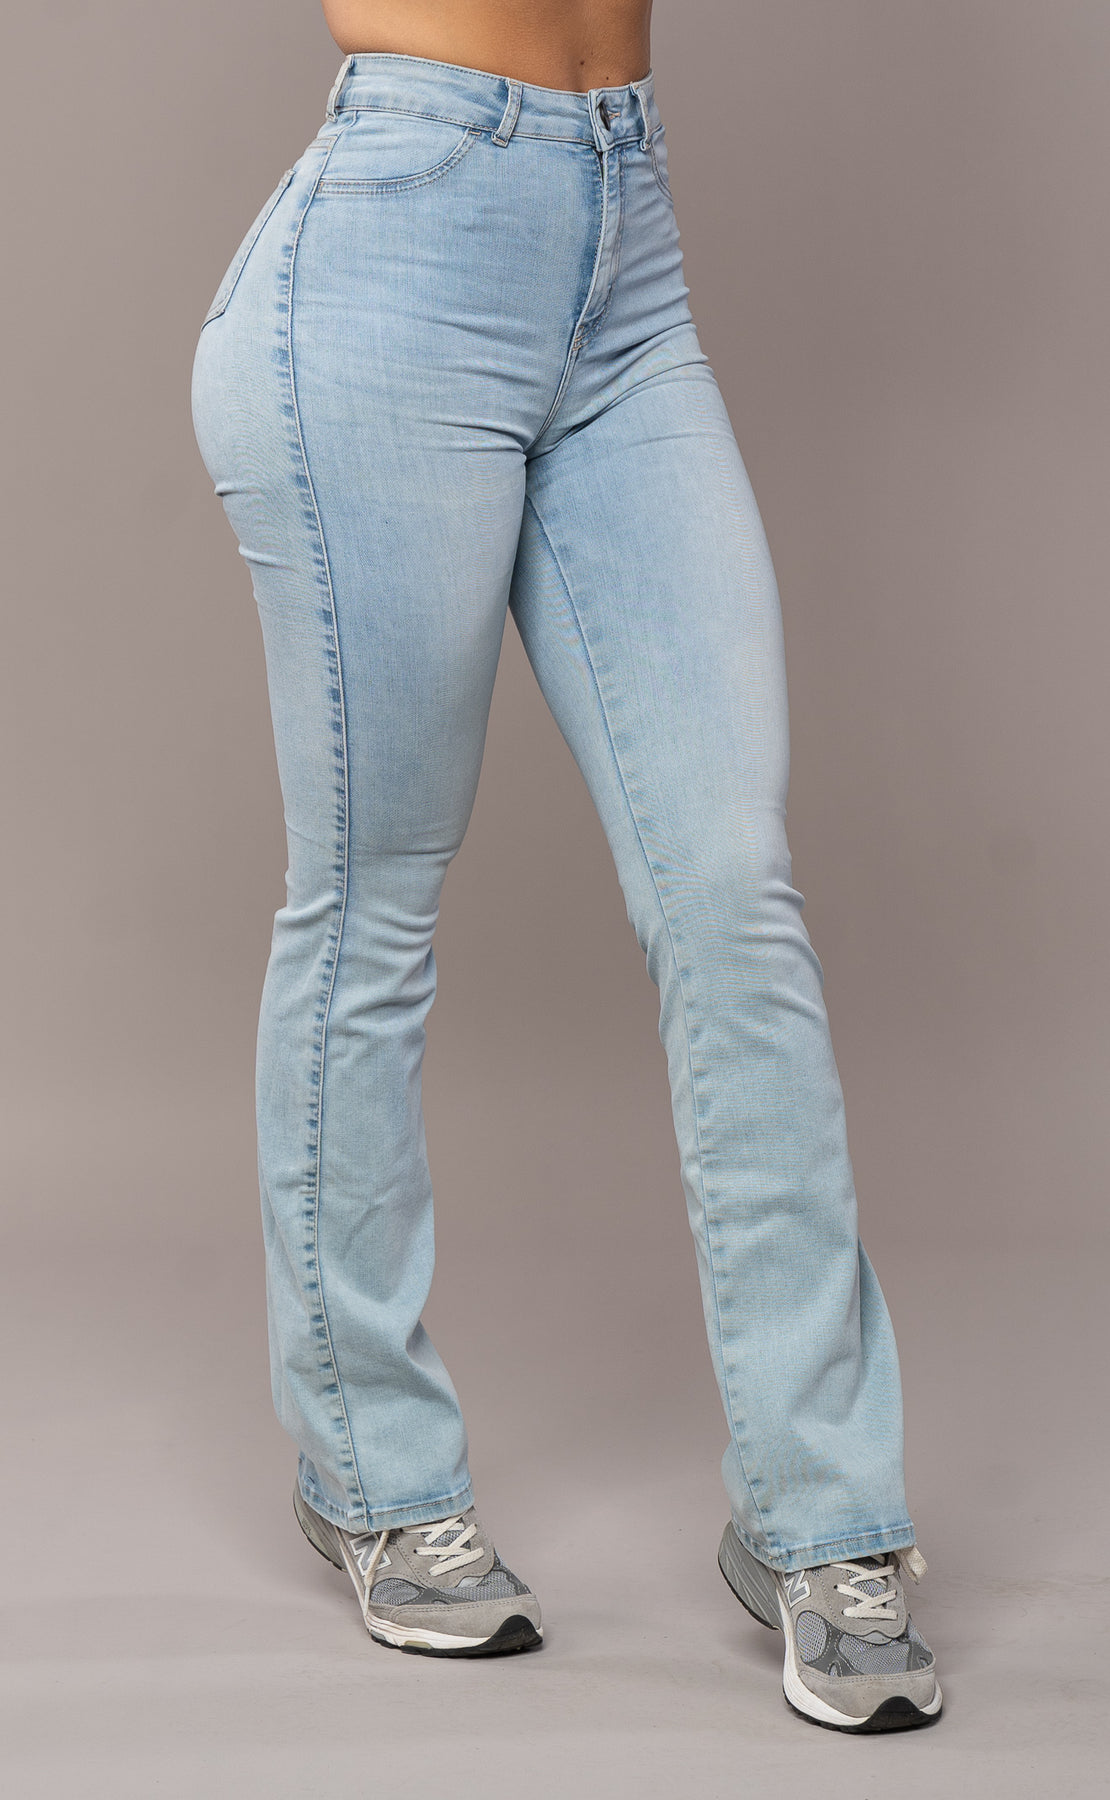 England Causal Skinny Jeans Women Blue Denim Pants Button Vaqueros Mujer  Push Up Vintage Classic Jean Grande Taille Femme From Amosty, $34.66